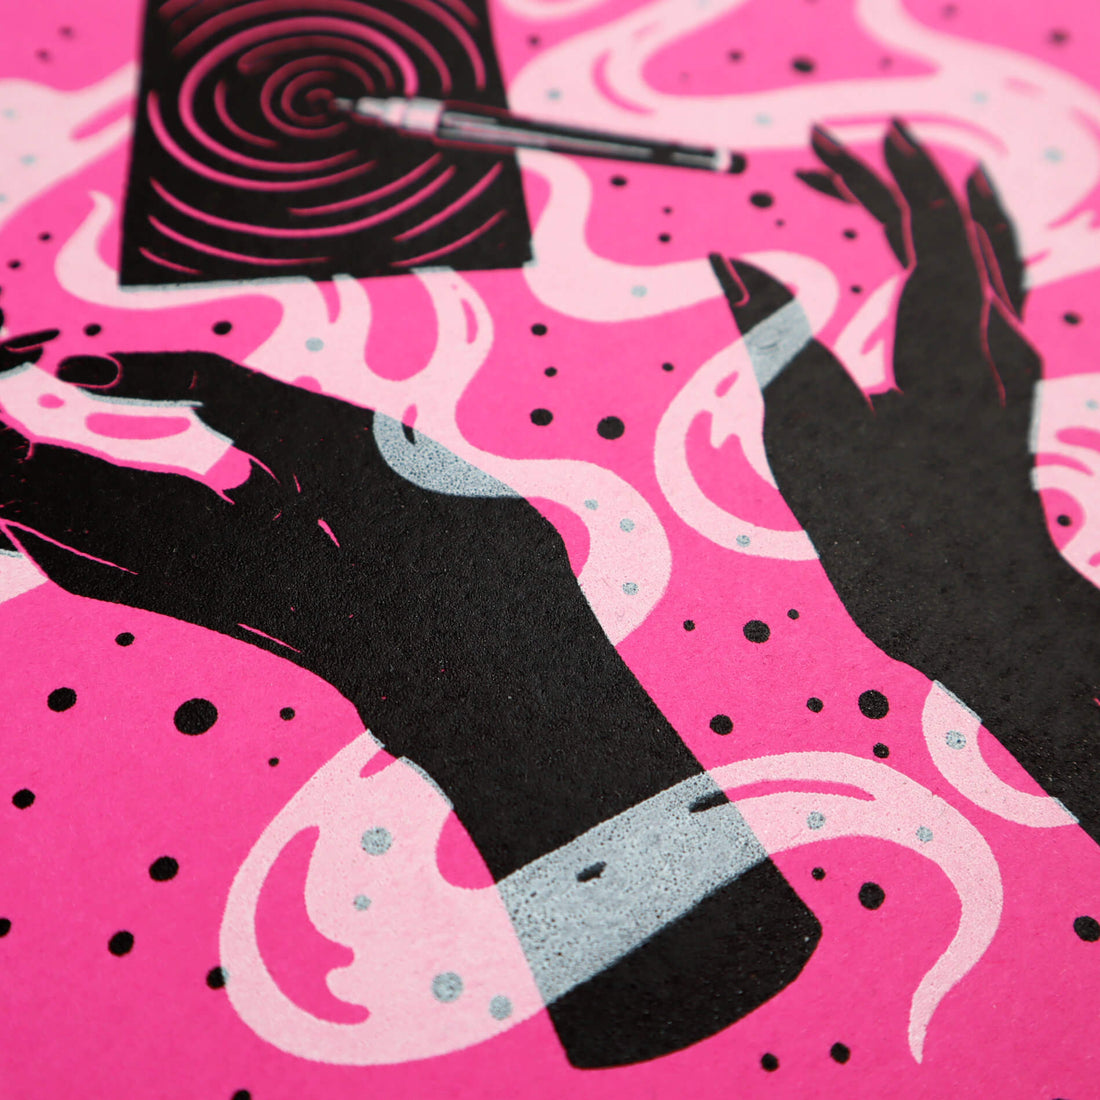 A close-up of a hot pink screenprinted artwork, with magical hands, floaty lines, and a piece of paper with a pen making designs on it.